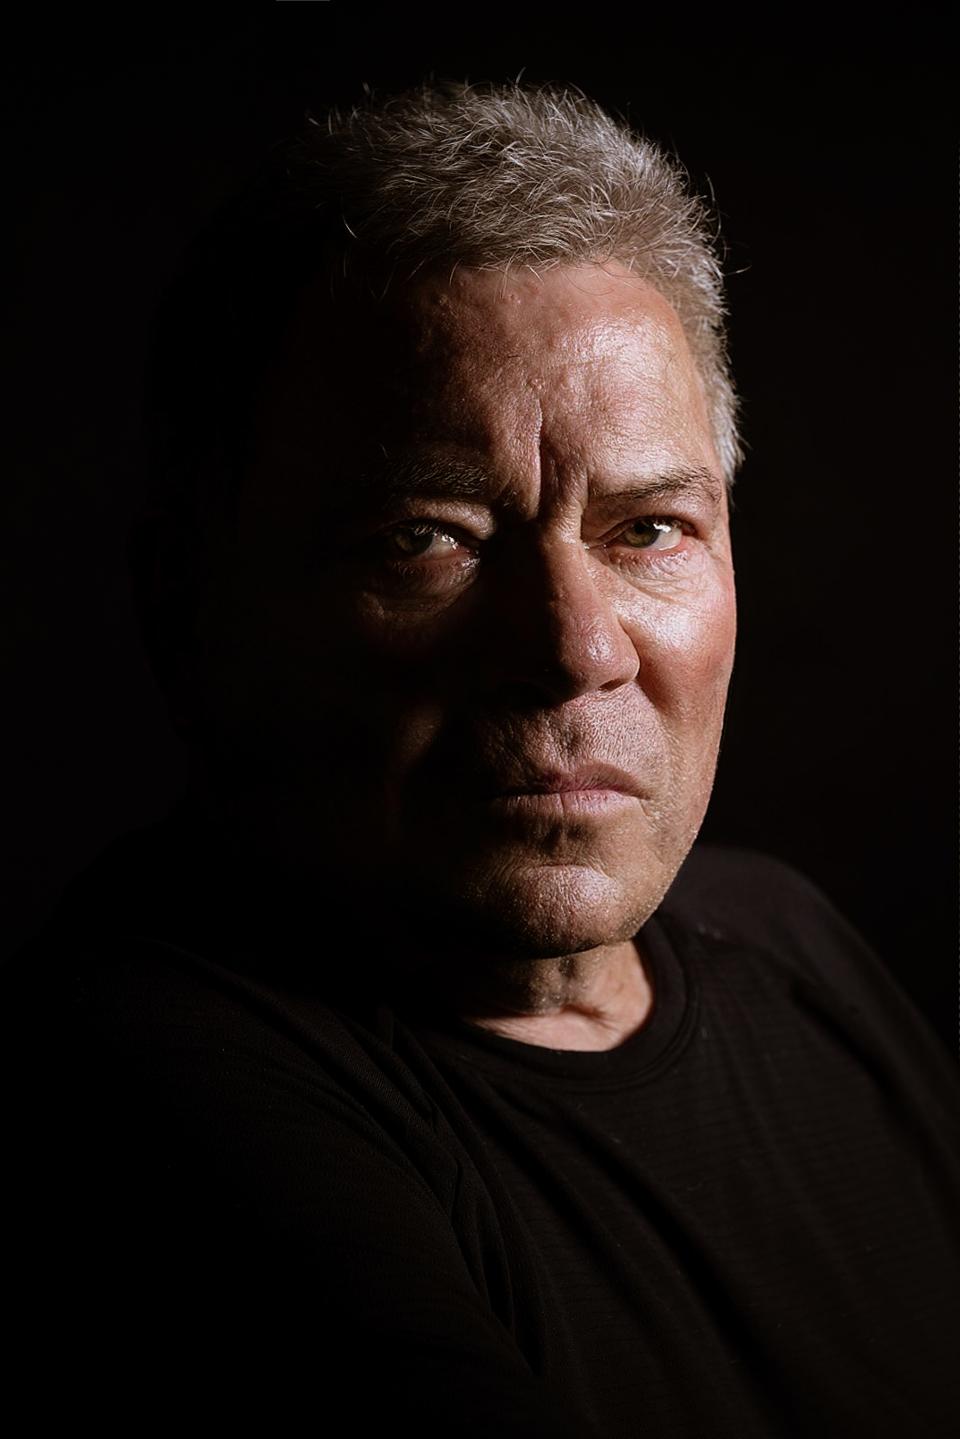 The King Center in Melbourne presents "William Shatner: Live on Stage" on Nov. 10. The evening includes a screening of "Star Trek II: The Wrath of Khan" and a Q&A by Shatner.